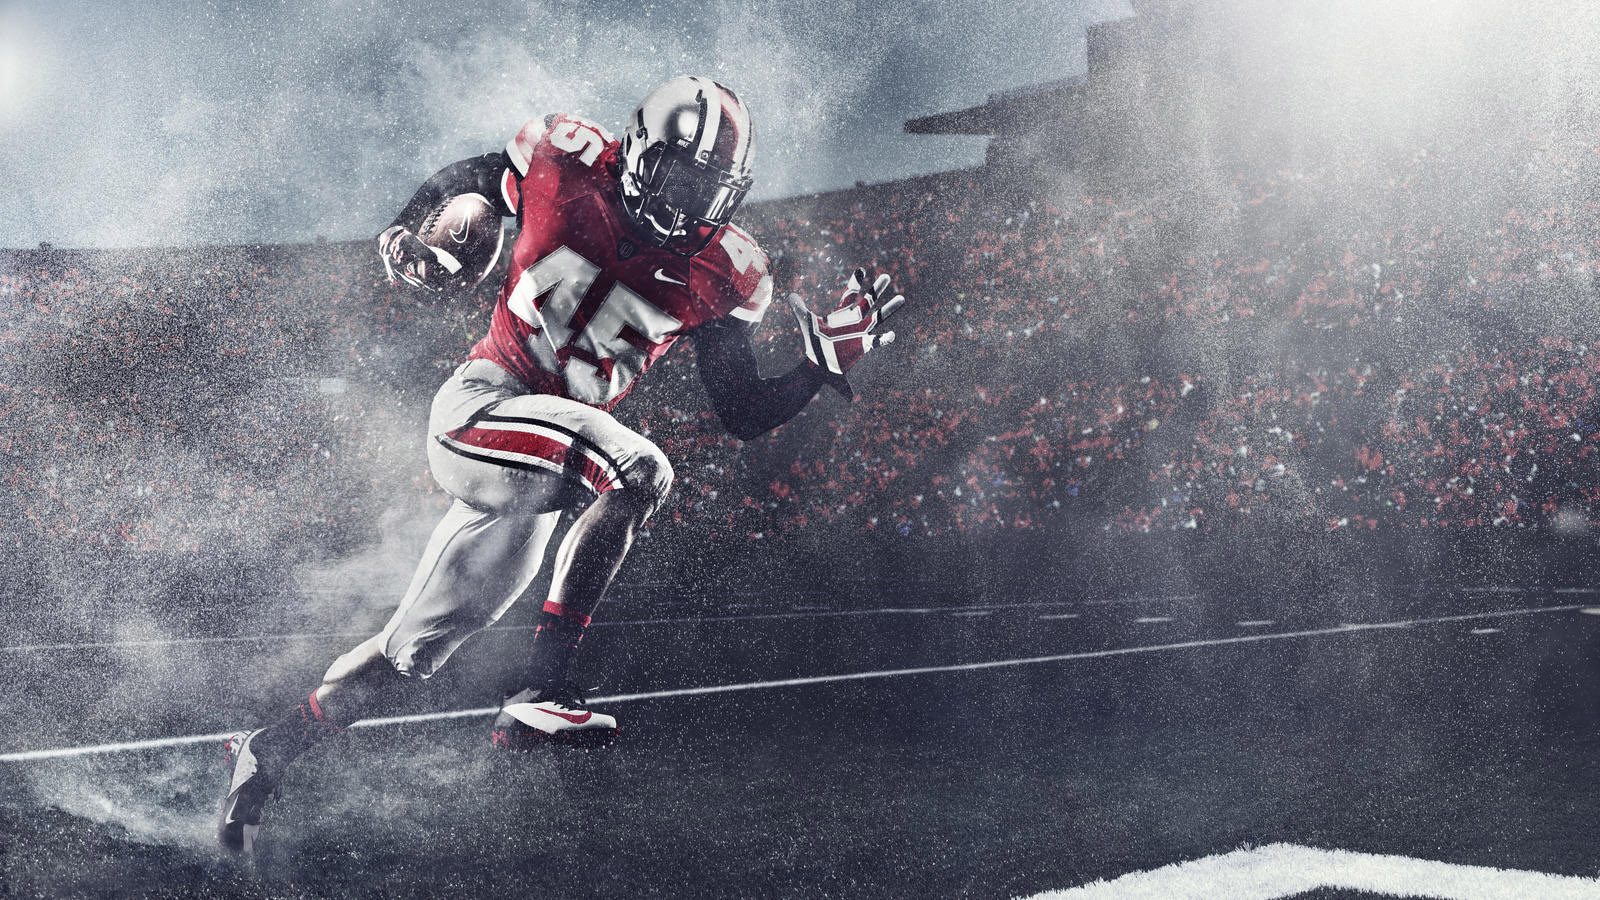  Ohio State football wallpaper for with new uniform HD Wallpapers for